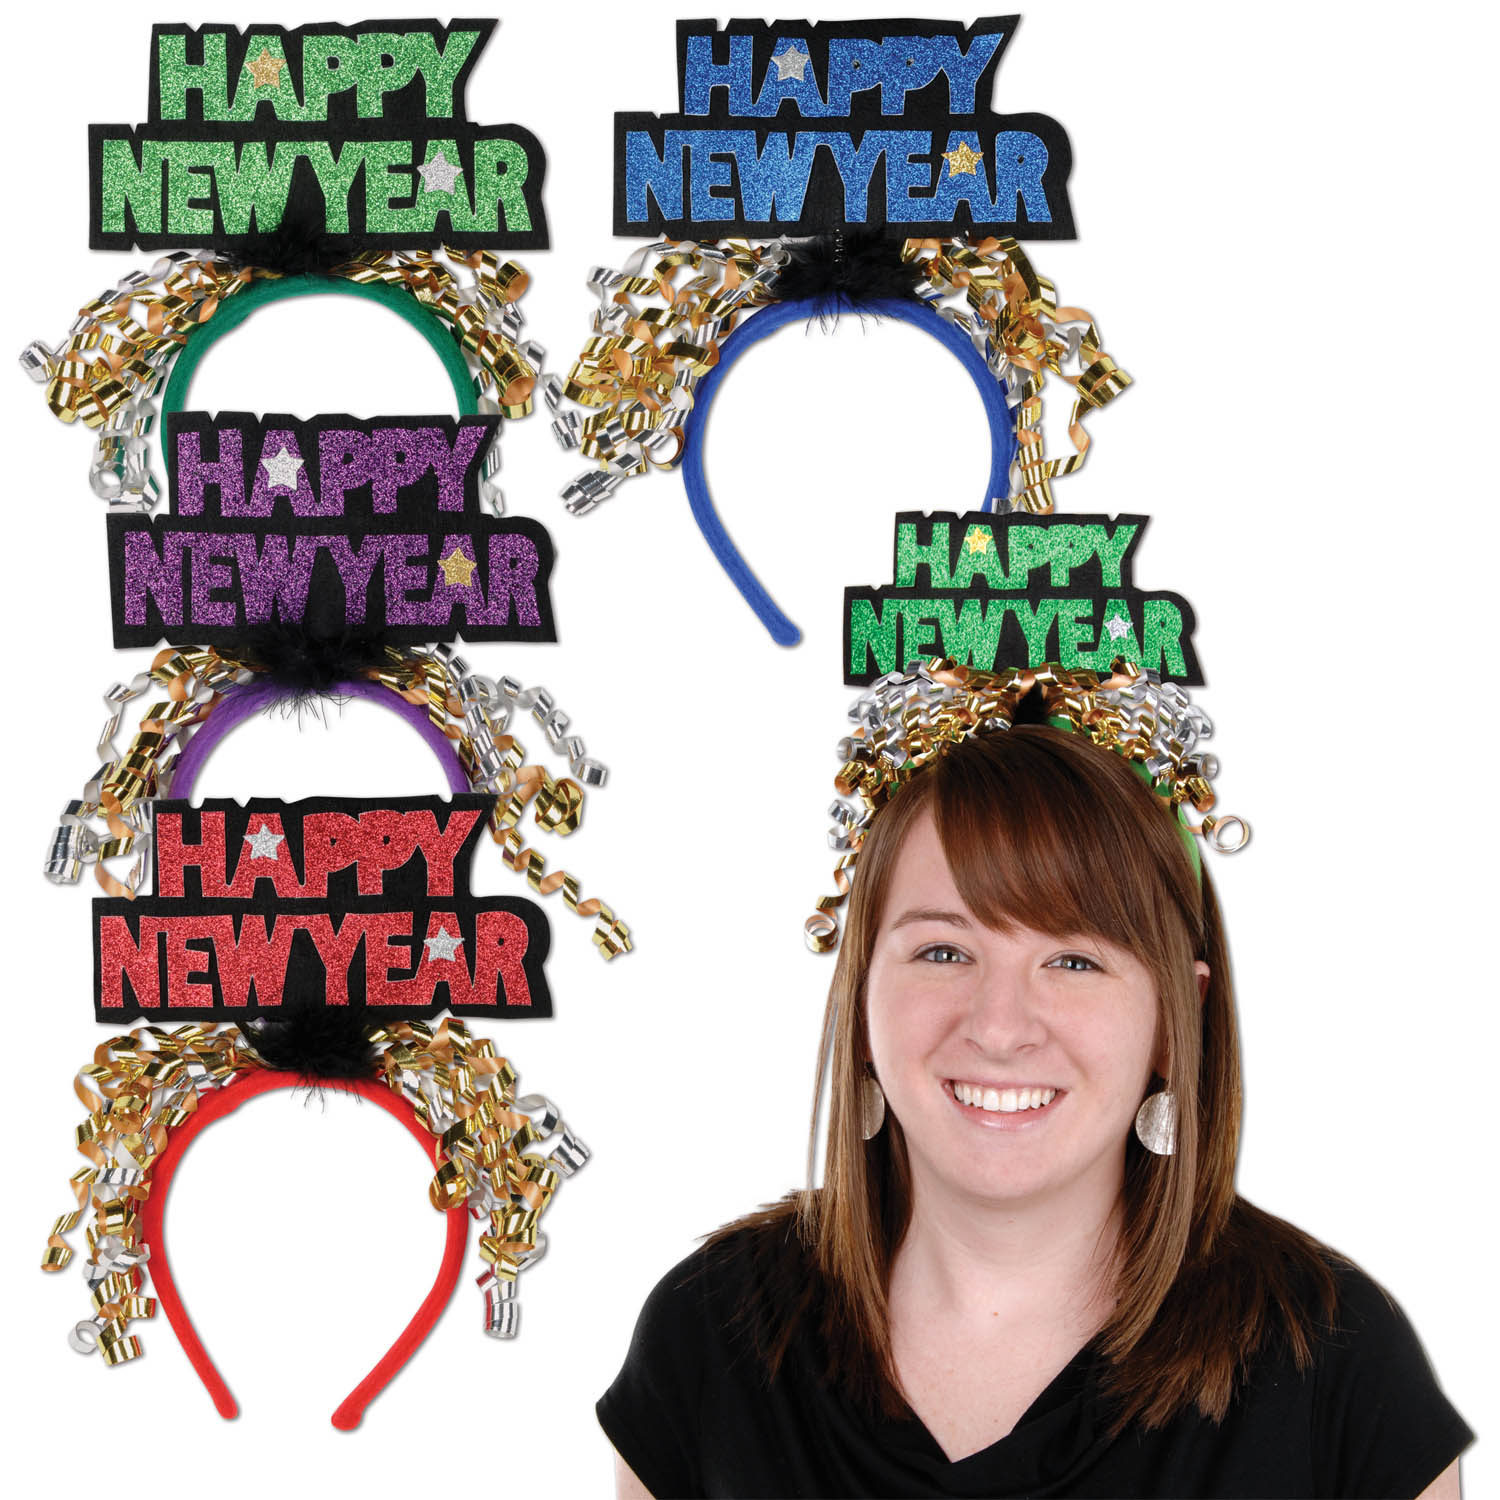 Headwear that comes with a red, purple, green or blue headband and reads "Happy New Year" with curled ribbon.